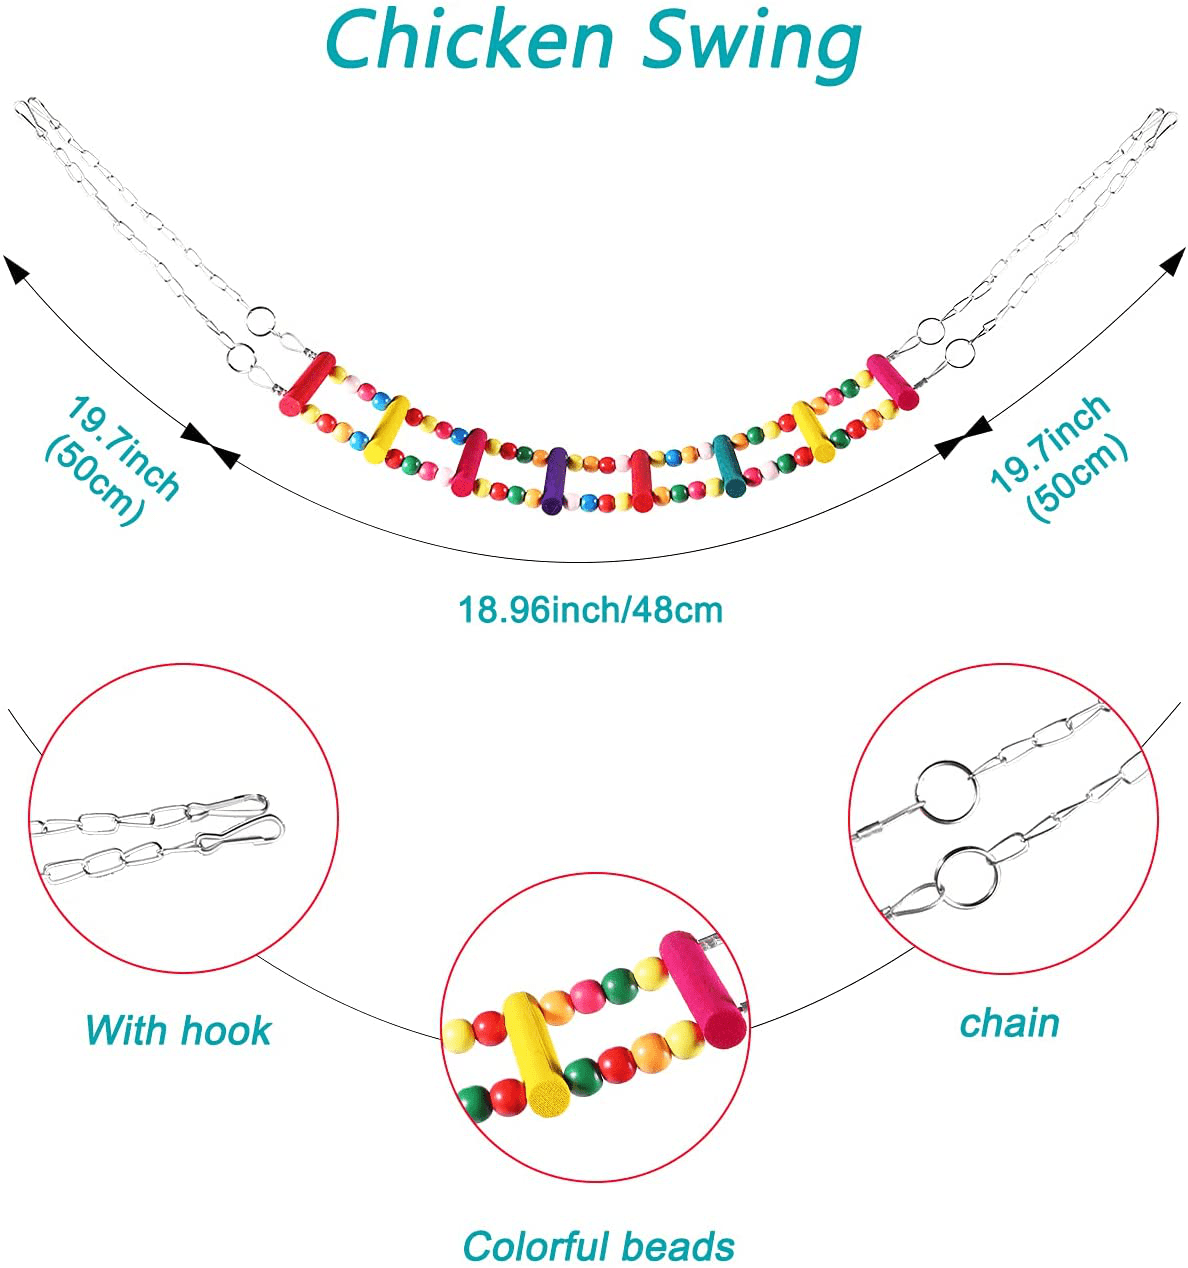 Woiworco 5 Packs Chicken Toys, Chicken Xylophone Toys, Chicken Mirror Toys for Hens, Chicken Ladders Swing Toys and Vegetable Hanging Feeder for Chicken Coop